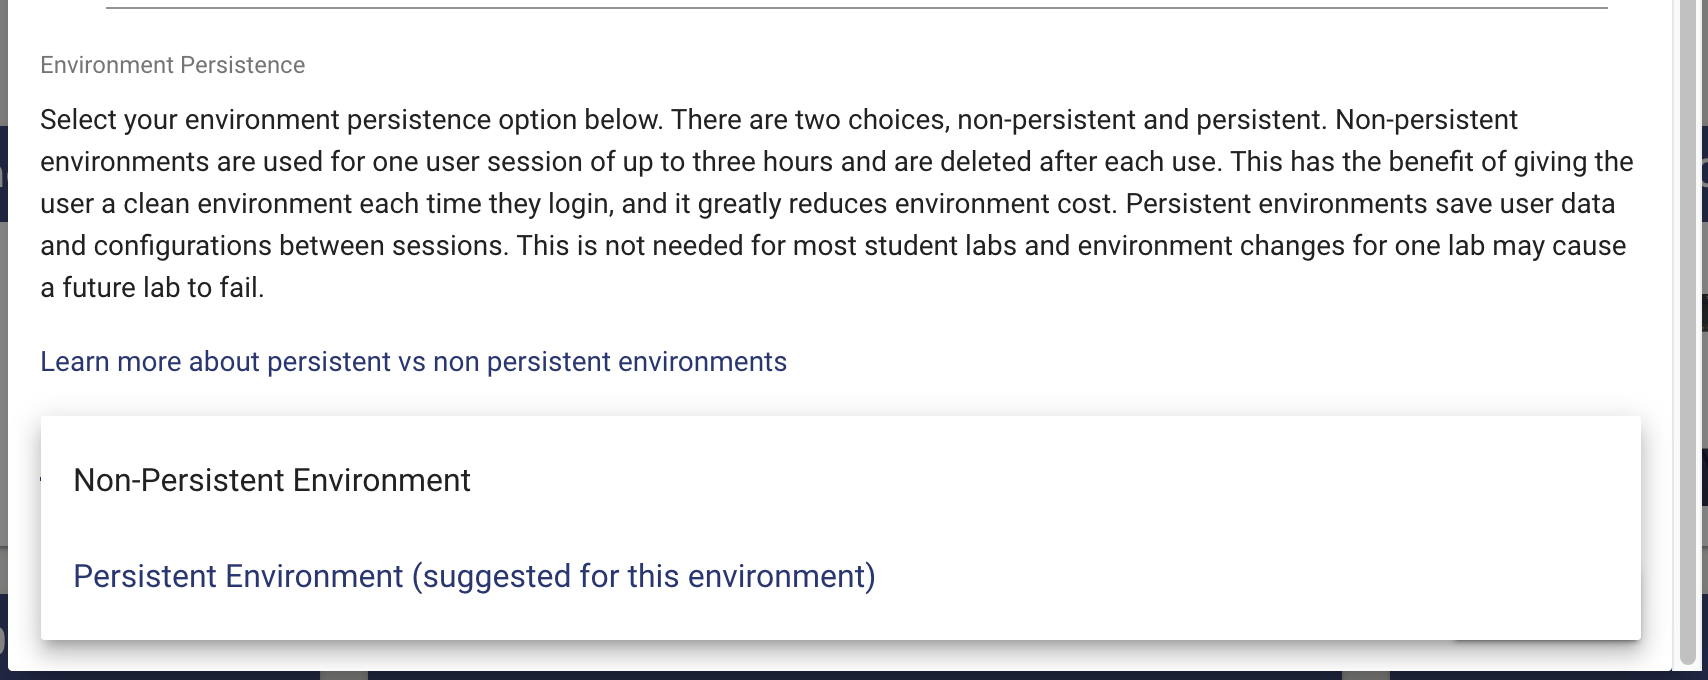 A description of the environment persistent options is shown. Below that are the buttons for selecting your persistence option.